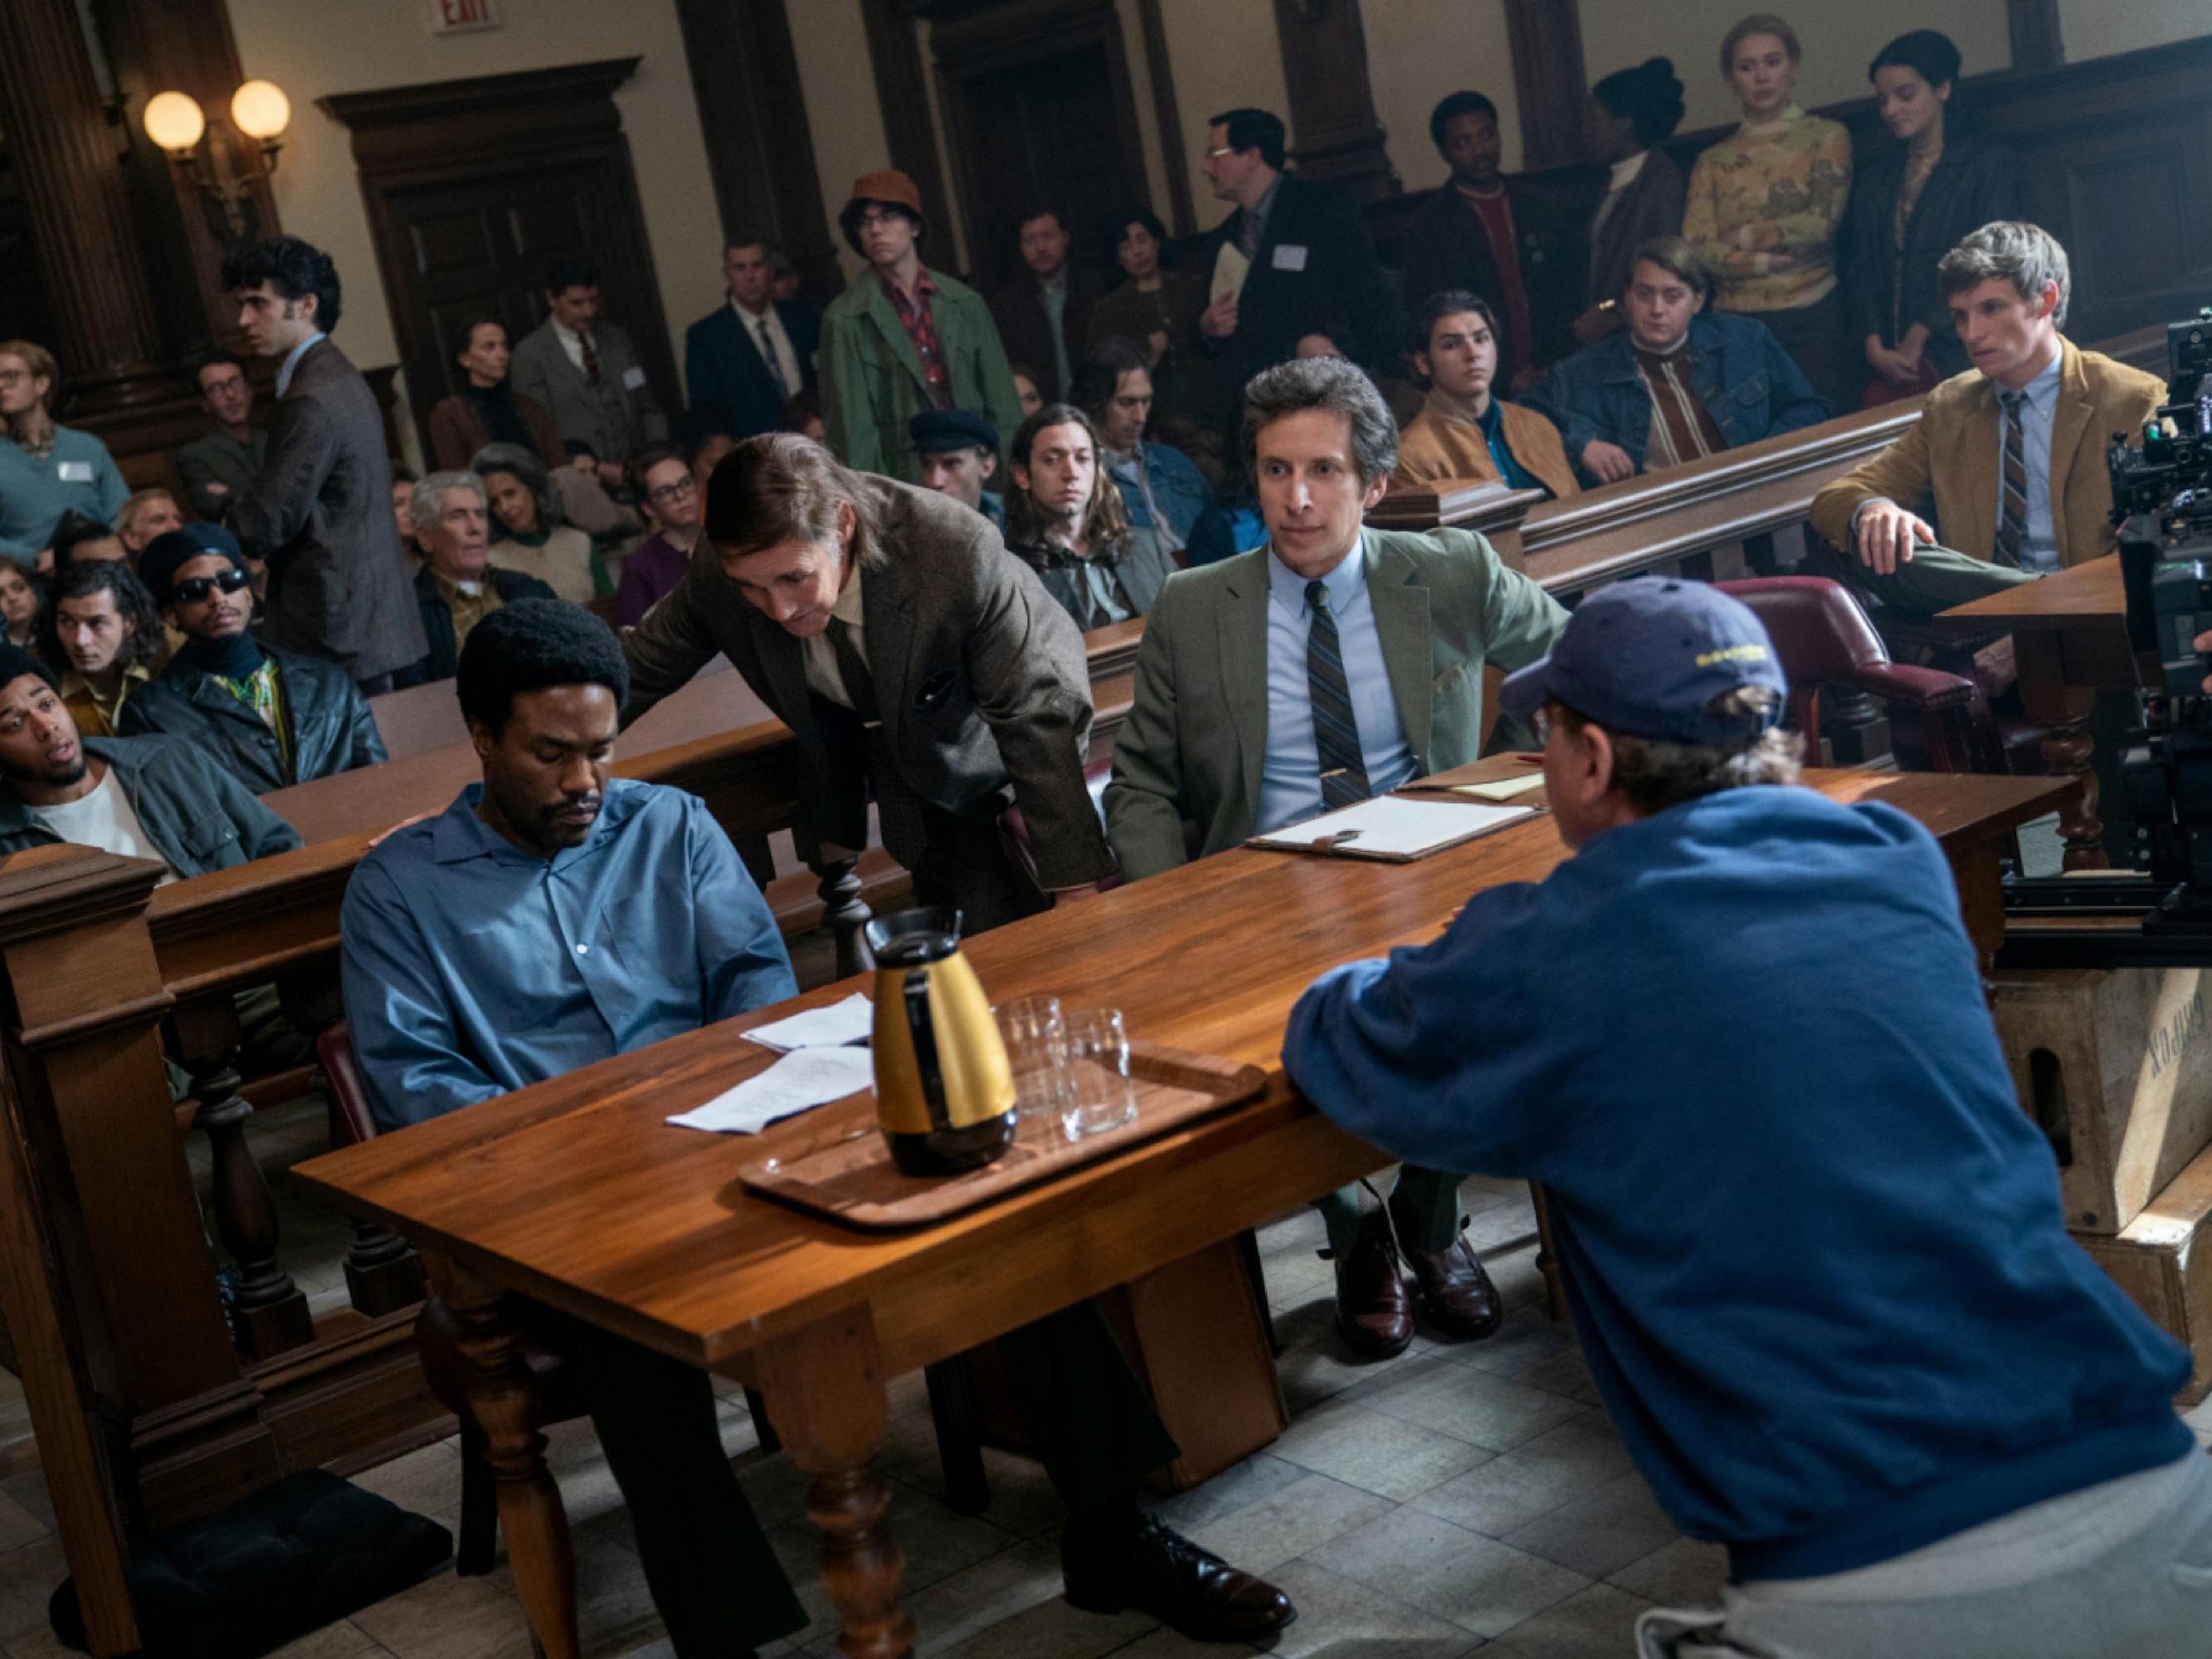 Abdul-Mateen, in costume as Bobby Seale, sits behind the defense table on this courtroom set, looking downwards. Fincher is pictured on the other side of the table, kneeling down. Mark Rylance, who plays lawyer William Kunstler, leans over Abdul-Mateen’s shoulder. Behind them extras fill the courtroom, as well as several actors portraying members of the Black Panthers.